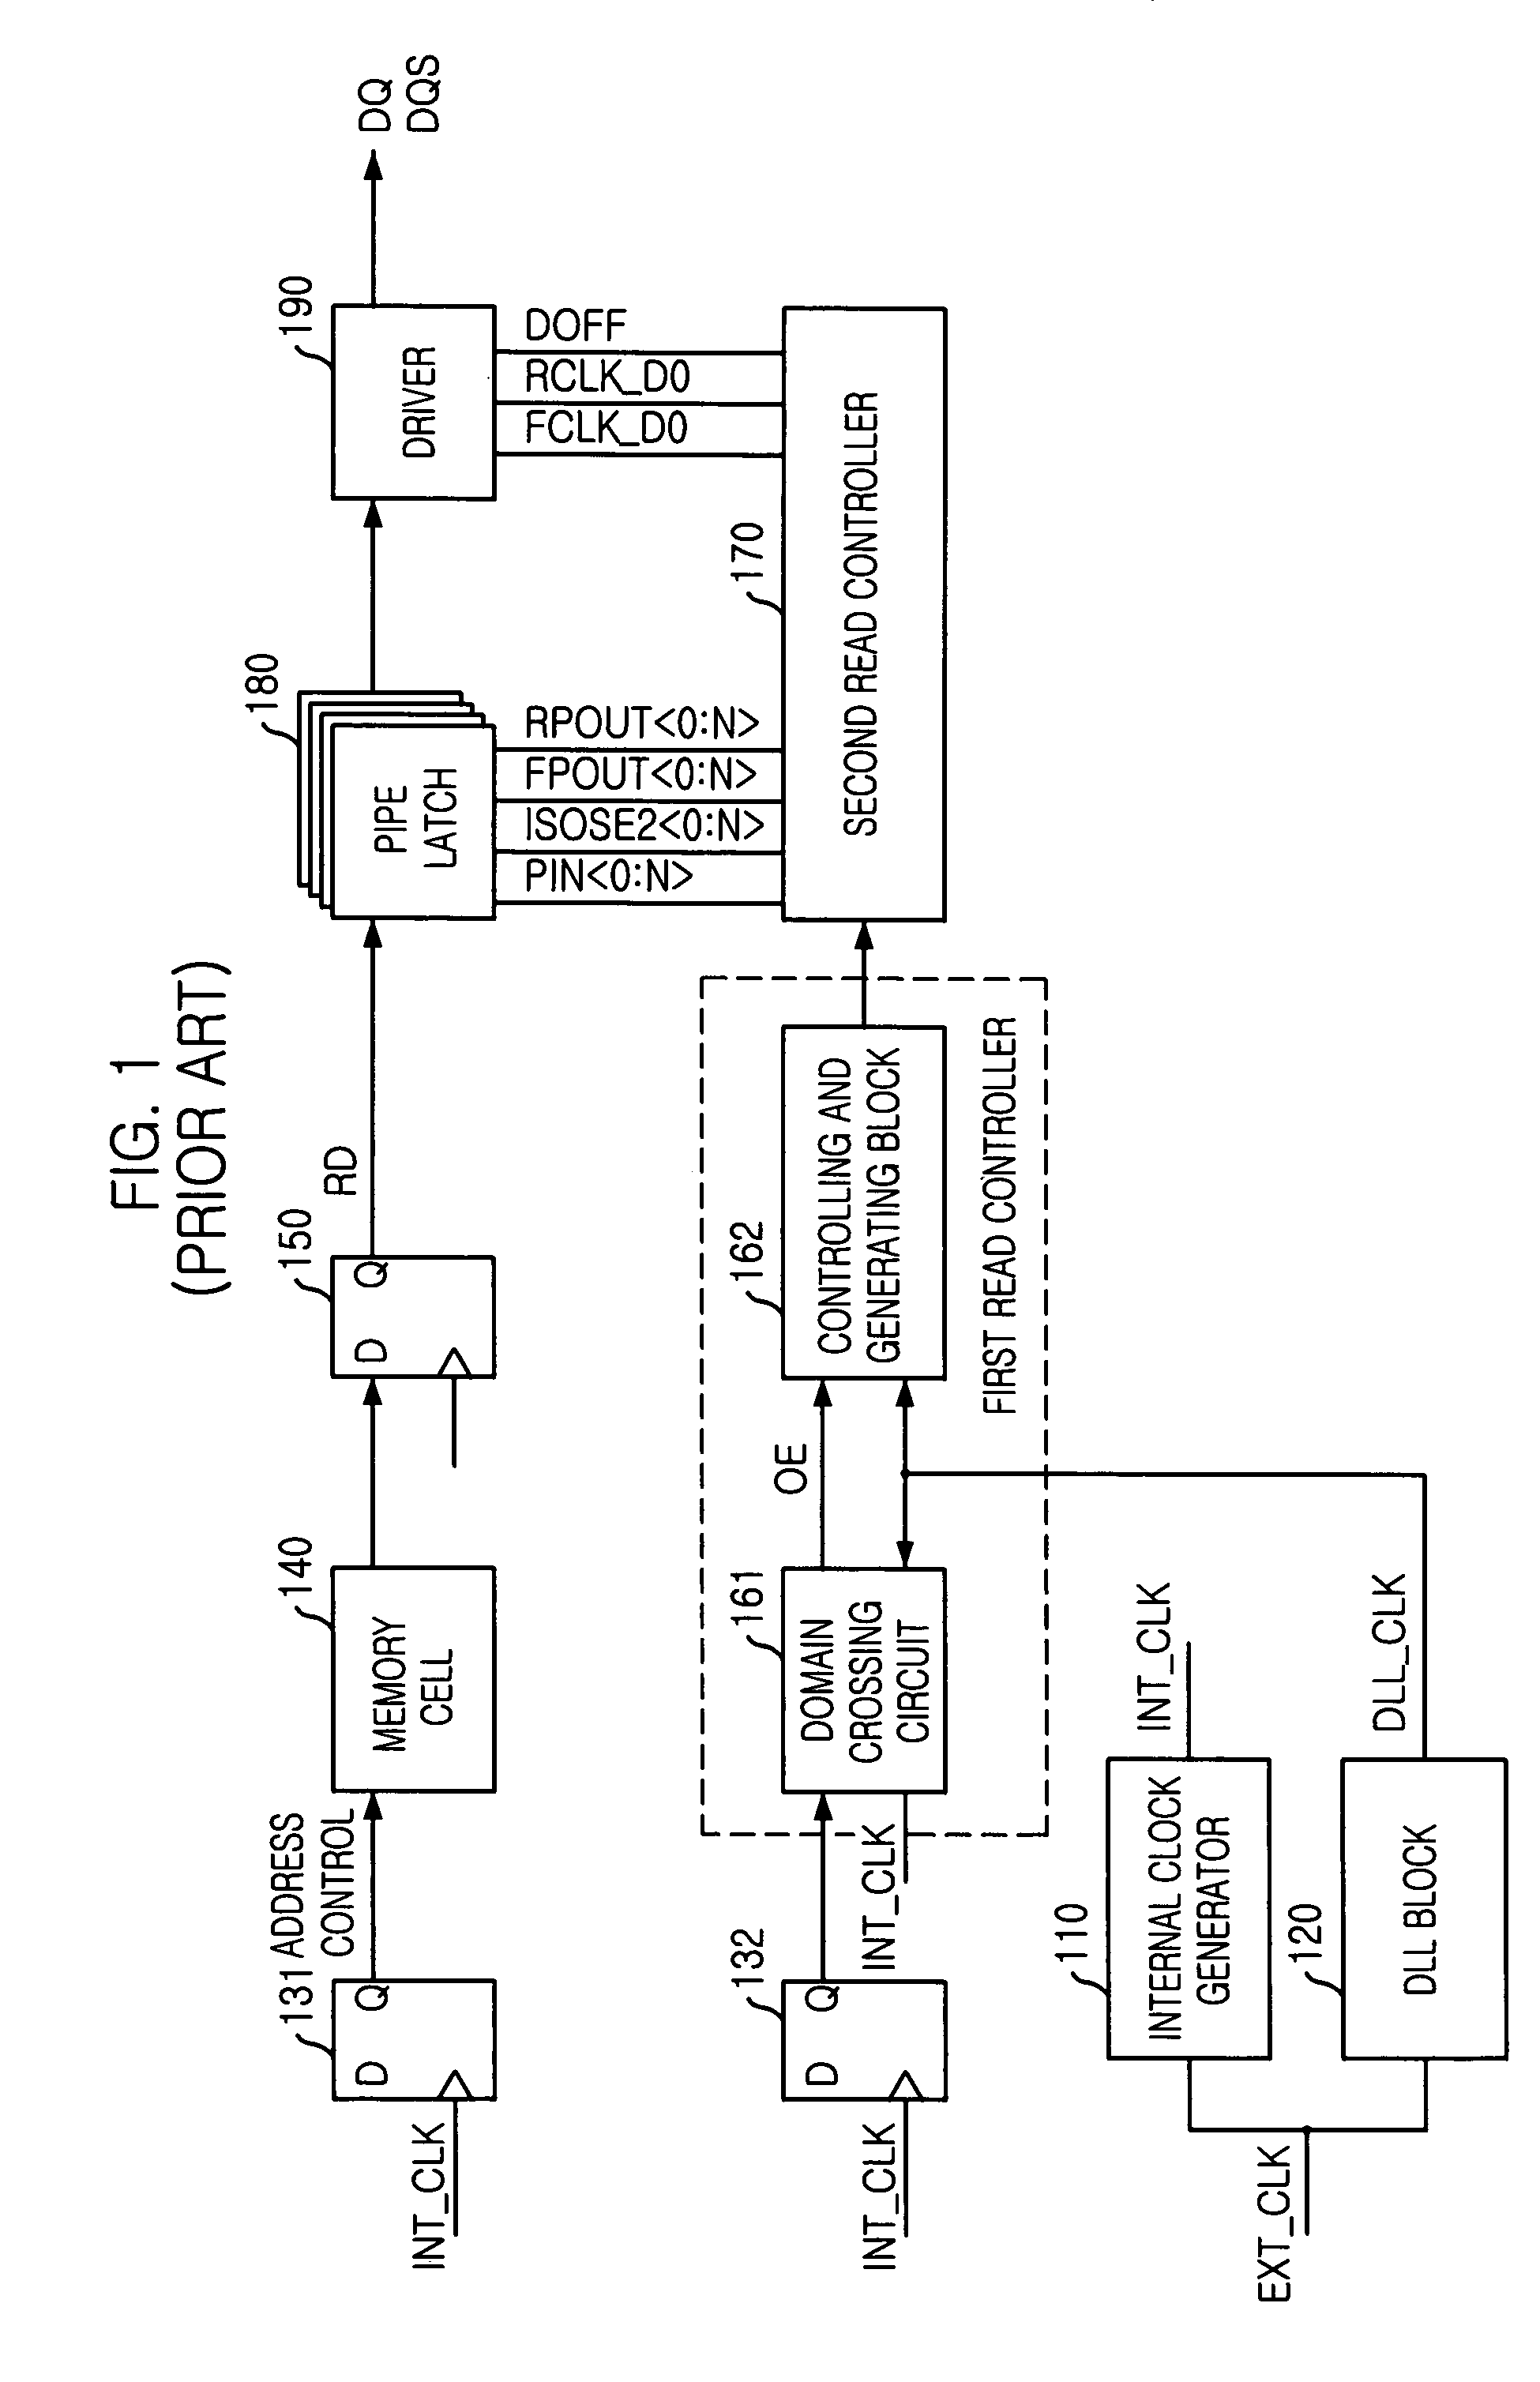 Semiconductor device for domain crossing